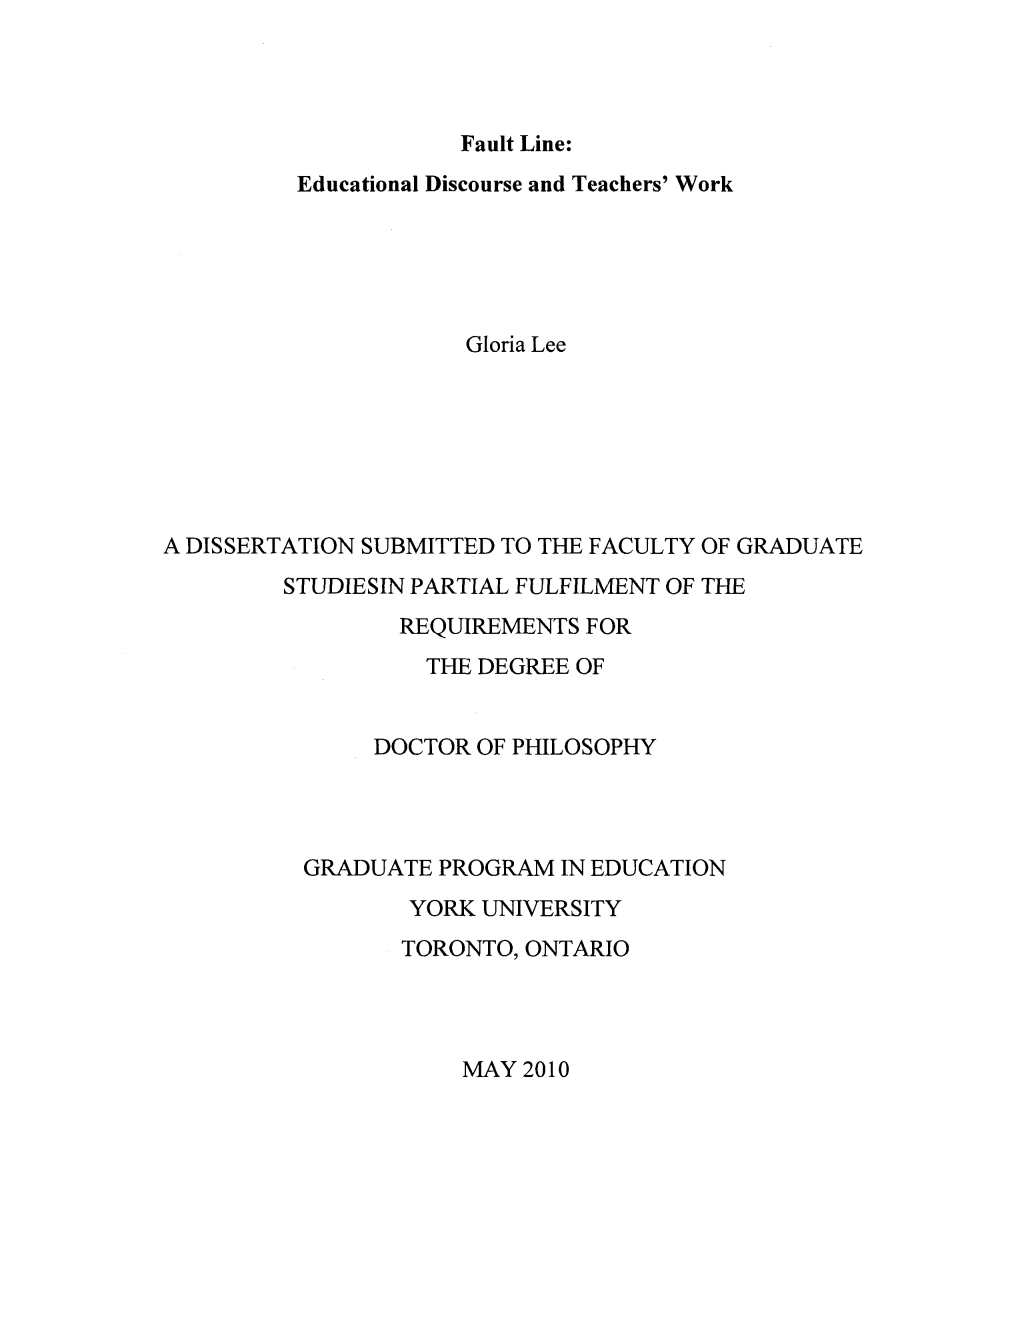 A Dissertation Submitted to the Faculty of Graduate Studiesin Partial Fulfilment of the Requirements for the Degree Of